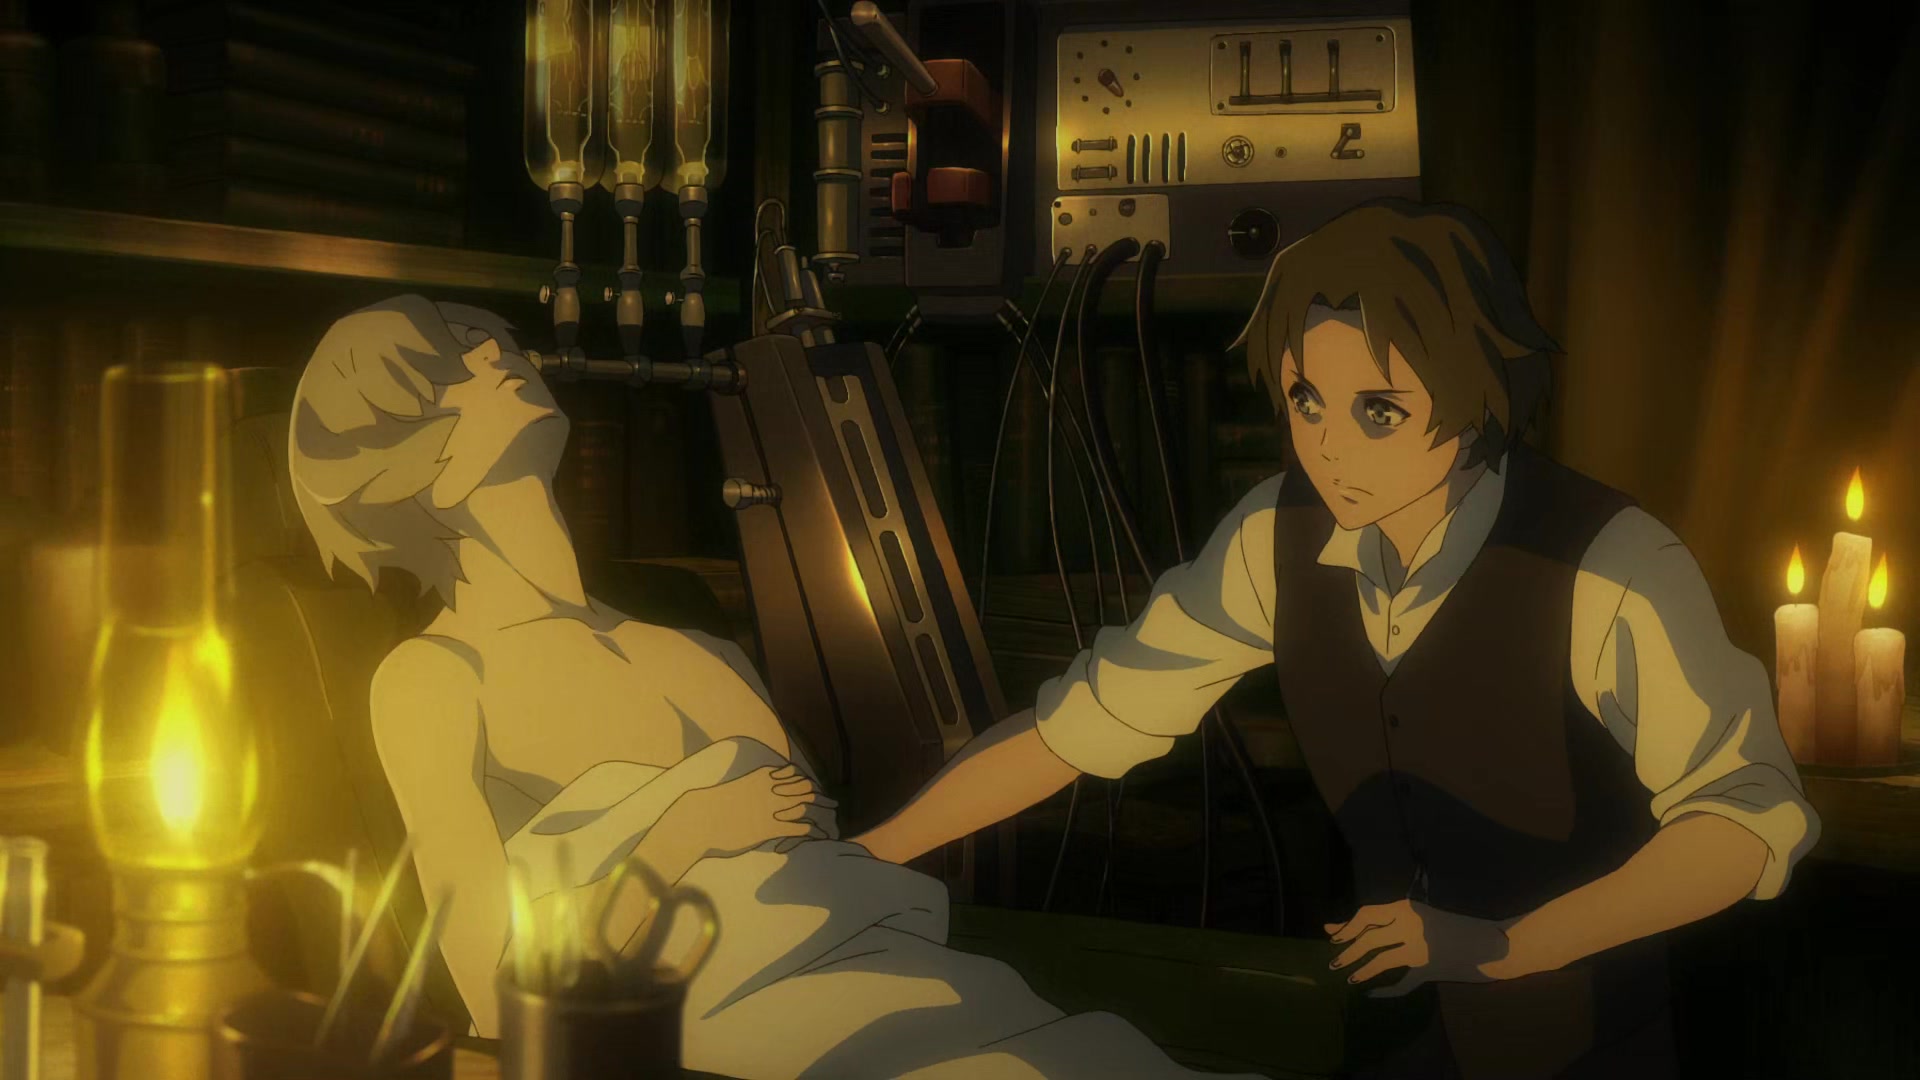 The Empire Of Corpses Hd Nikolai Krasotkin Wallpapers